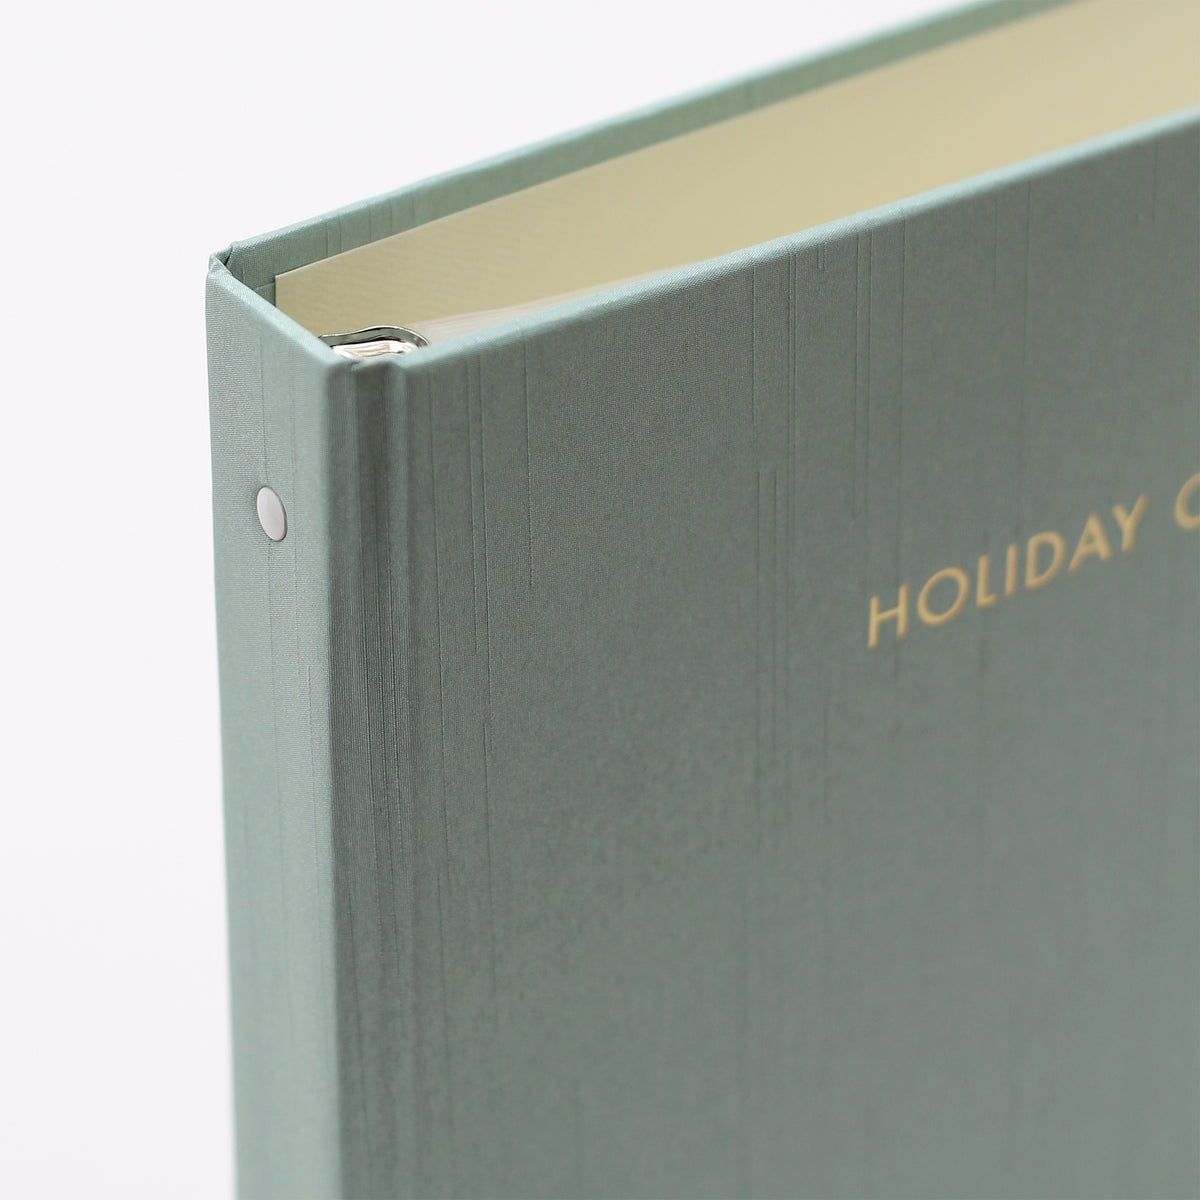 Holiday Card Album | Cover: Misty Blue Silk | Embossed with “Holiday Cards” | Available Personalized